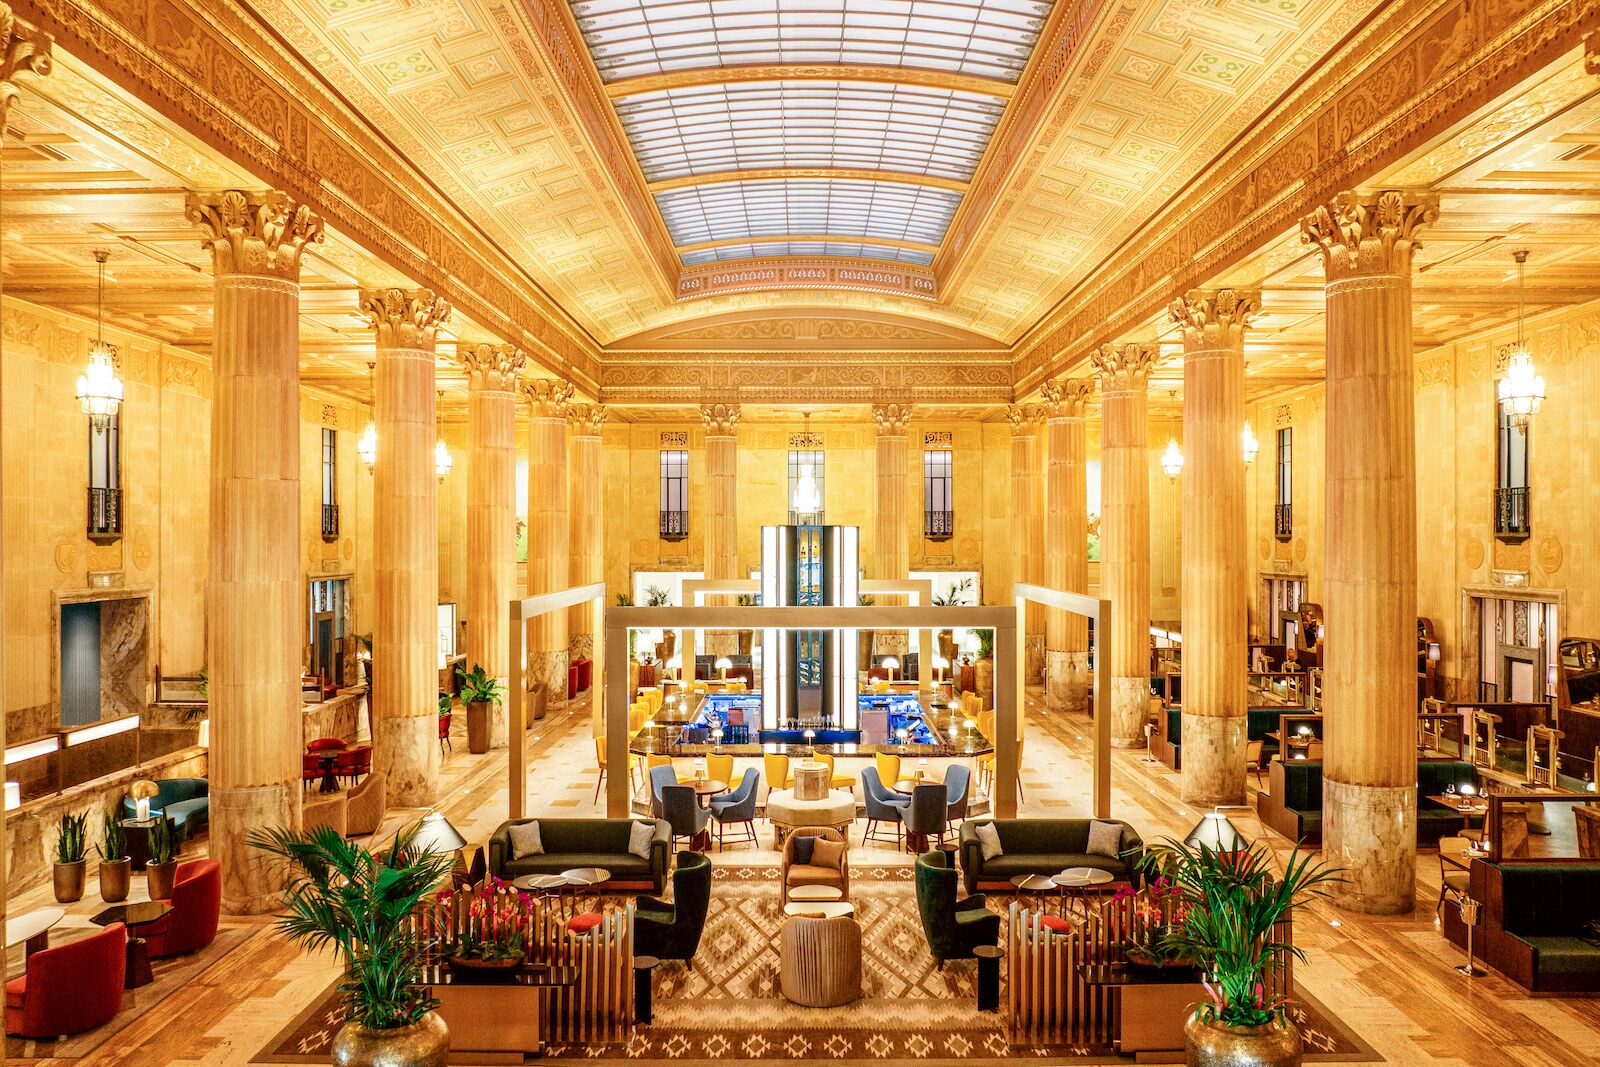 The Great Hall bar and lobby with large columns at The National hotel